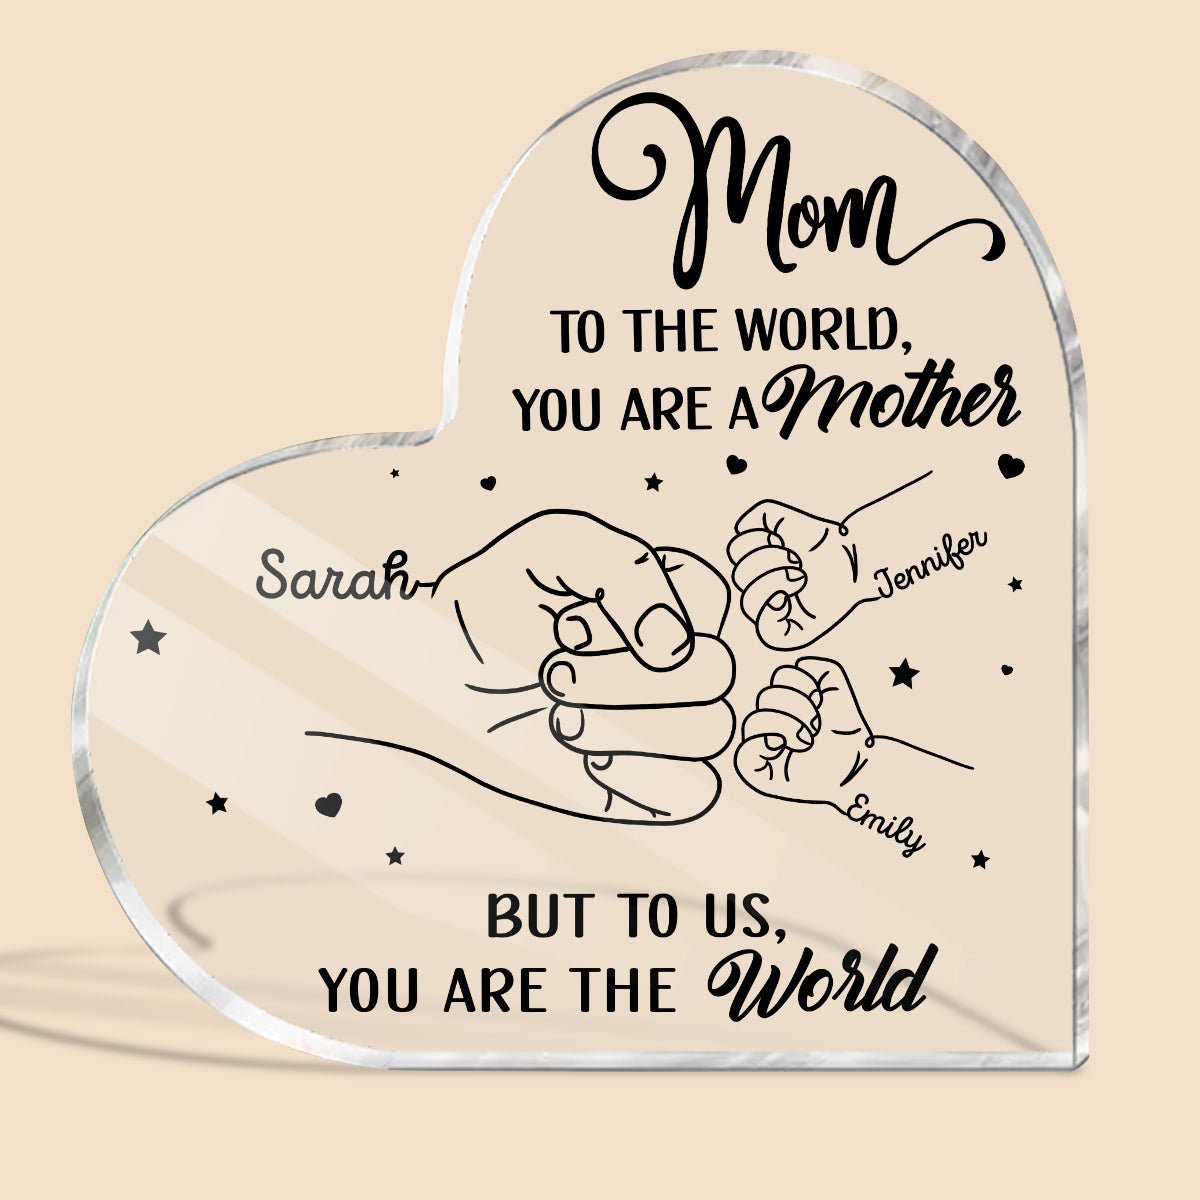 Mom Hand Bumps Kids To Us You Are The World - Personalized Heart Plaque - Best Gift For Mother - Giftago